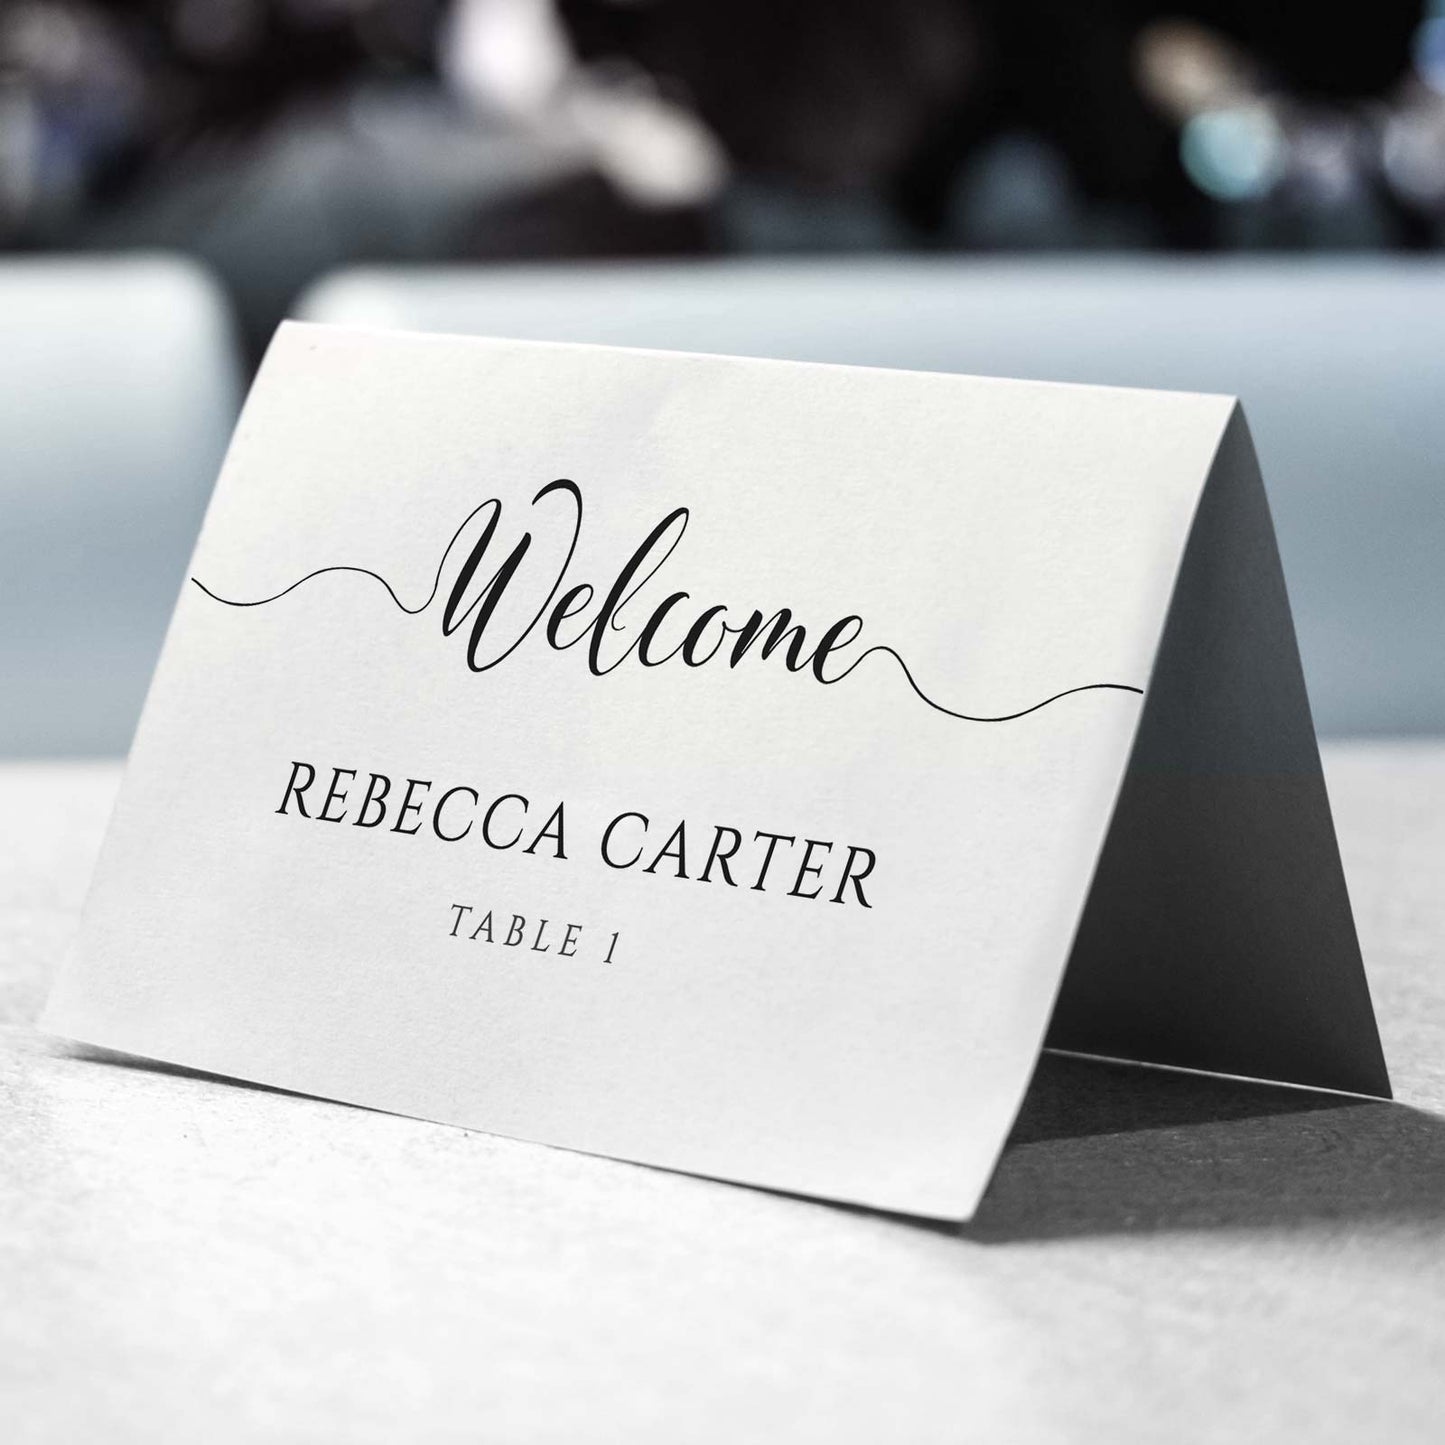 Folded tent card with editable guest name and table number